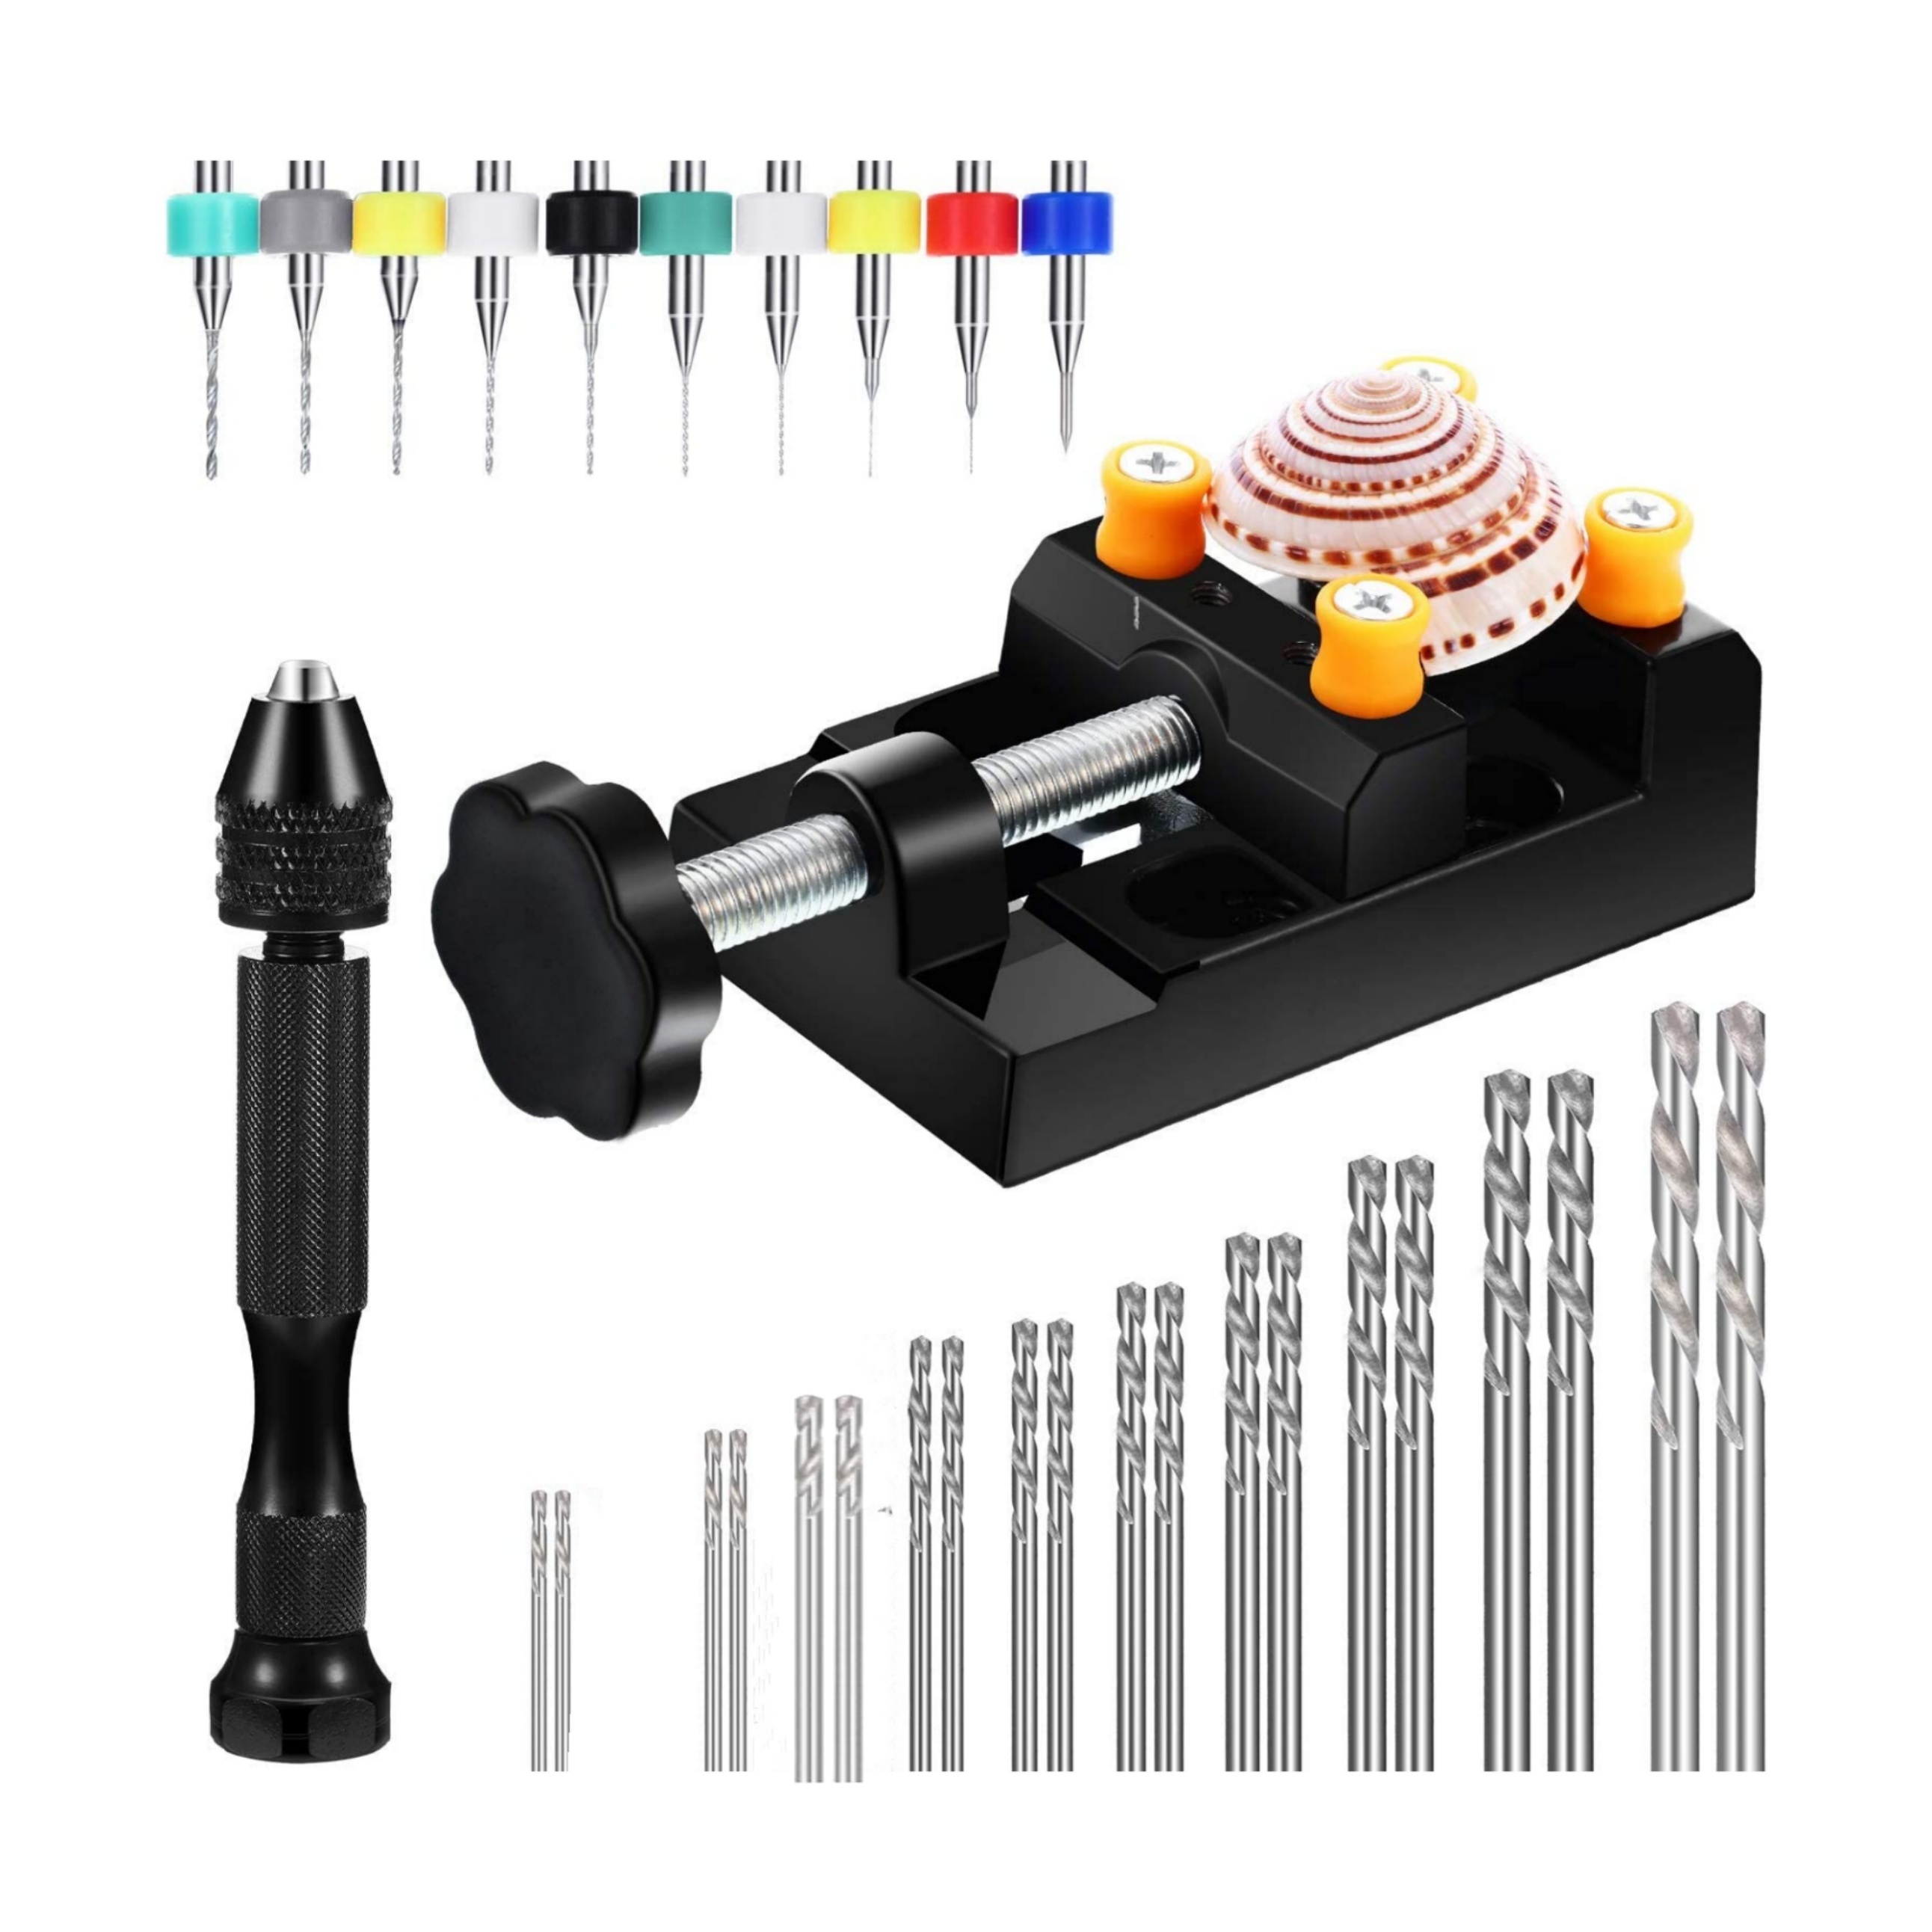 

32 Pieces Hand Drill Tool Set, Pin Vise Hand Drill, Miniature Drill Mini Twist Drill Bit, Bench Vice For Craft Carving Resin Diy Jewelry Making Tool (0.3-1.2 Mm Pcb Drill)